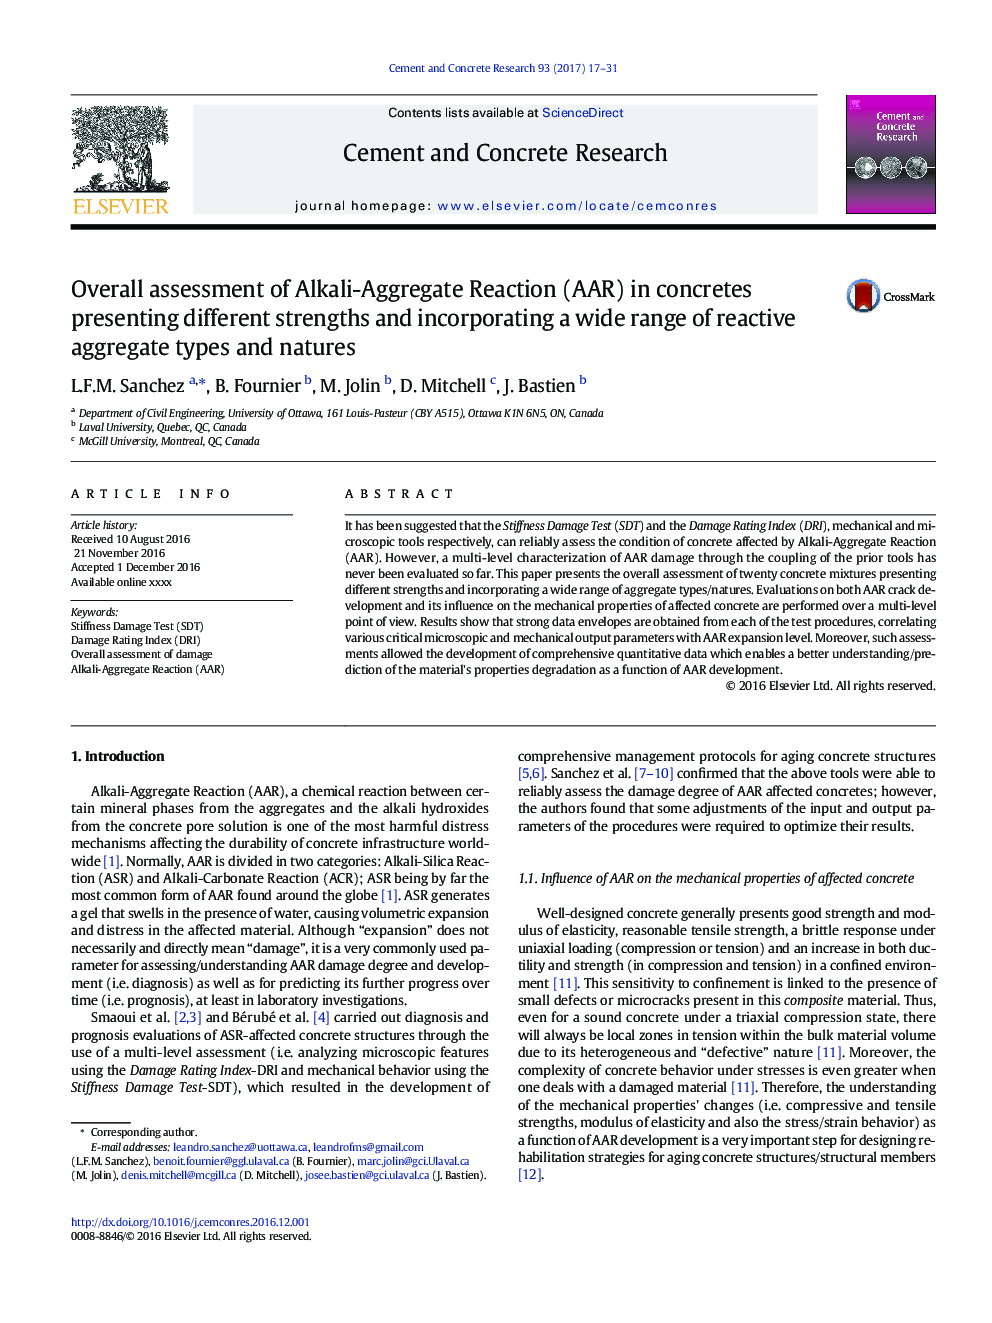 Overall assessment of Alkali-Aggregate Reaction (AAR) in concretes presenting different strengths and incorporating a wide range of reactive aggregate types and natures